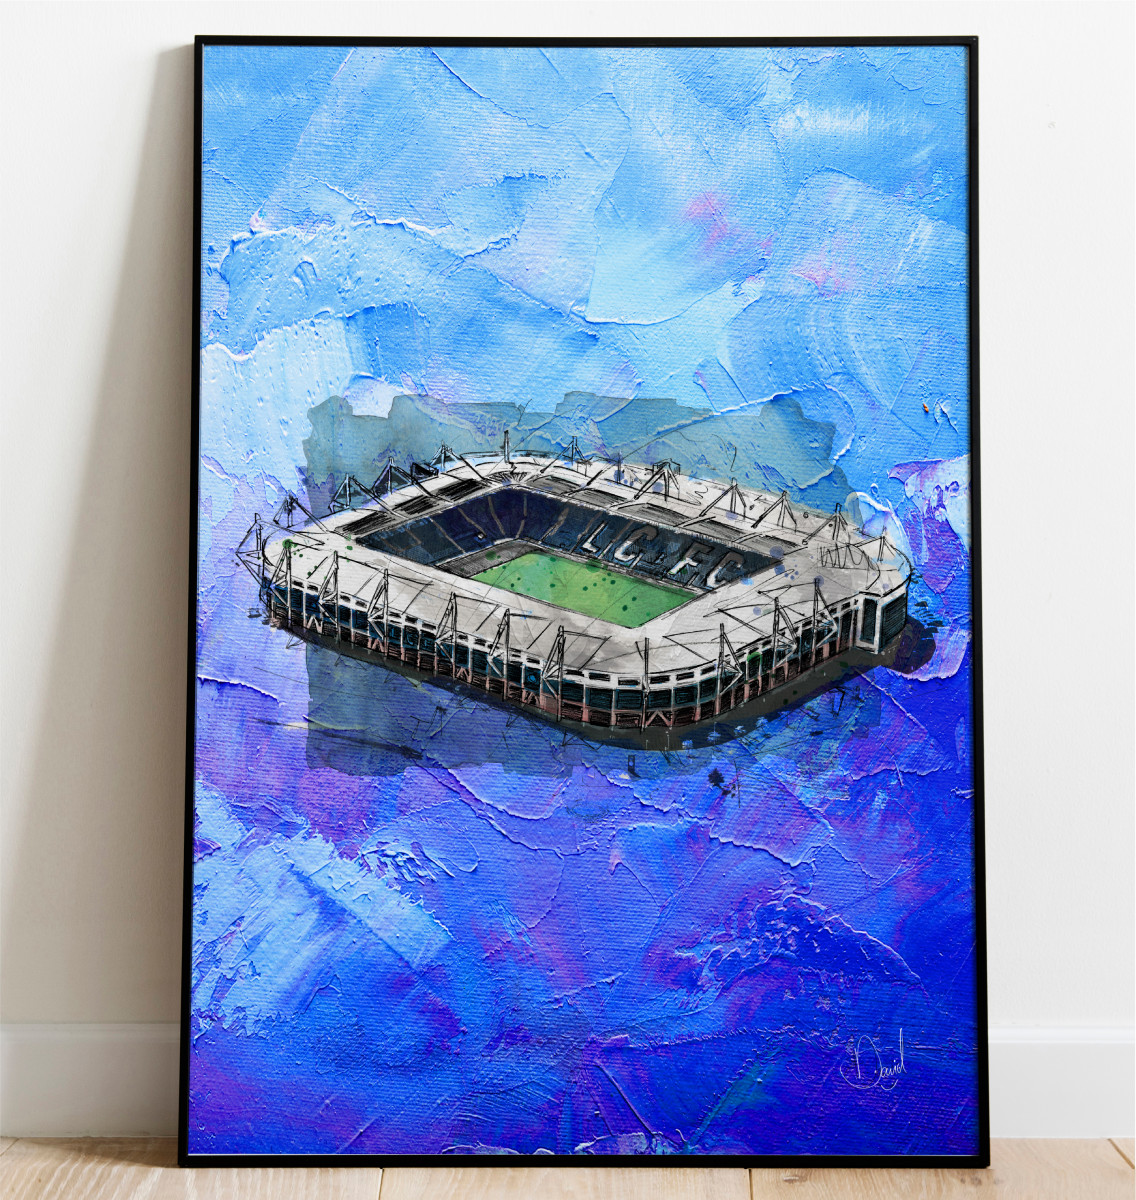 Leicester City - King Power Stadium on oil, special edition art print